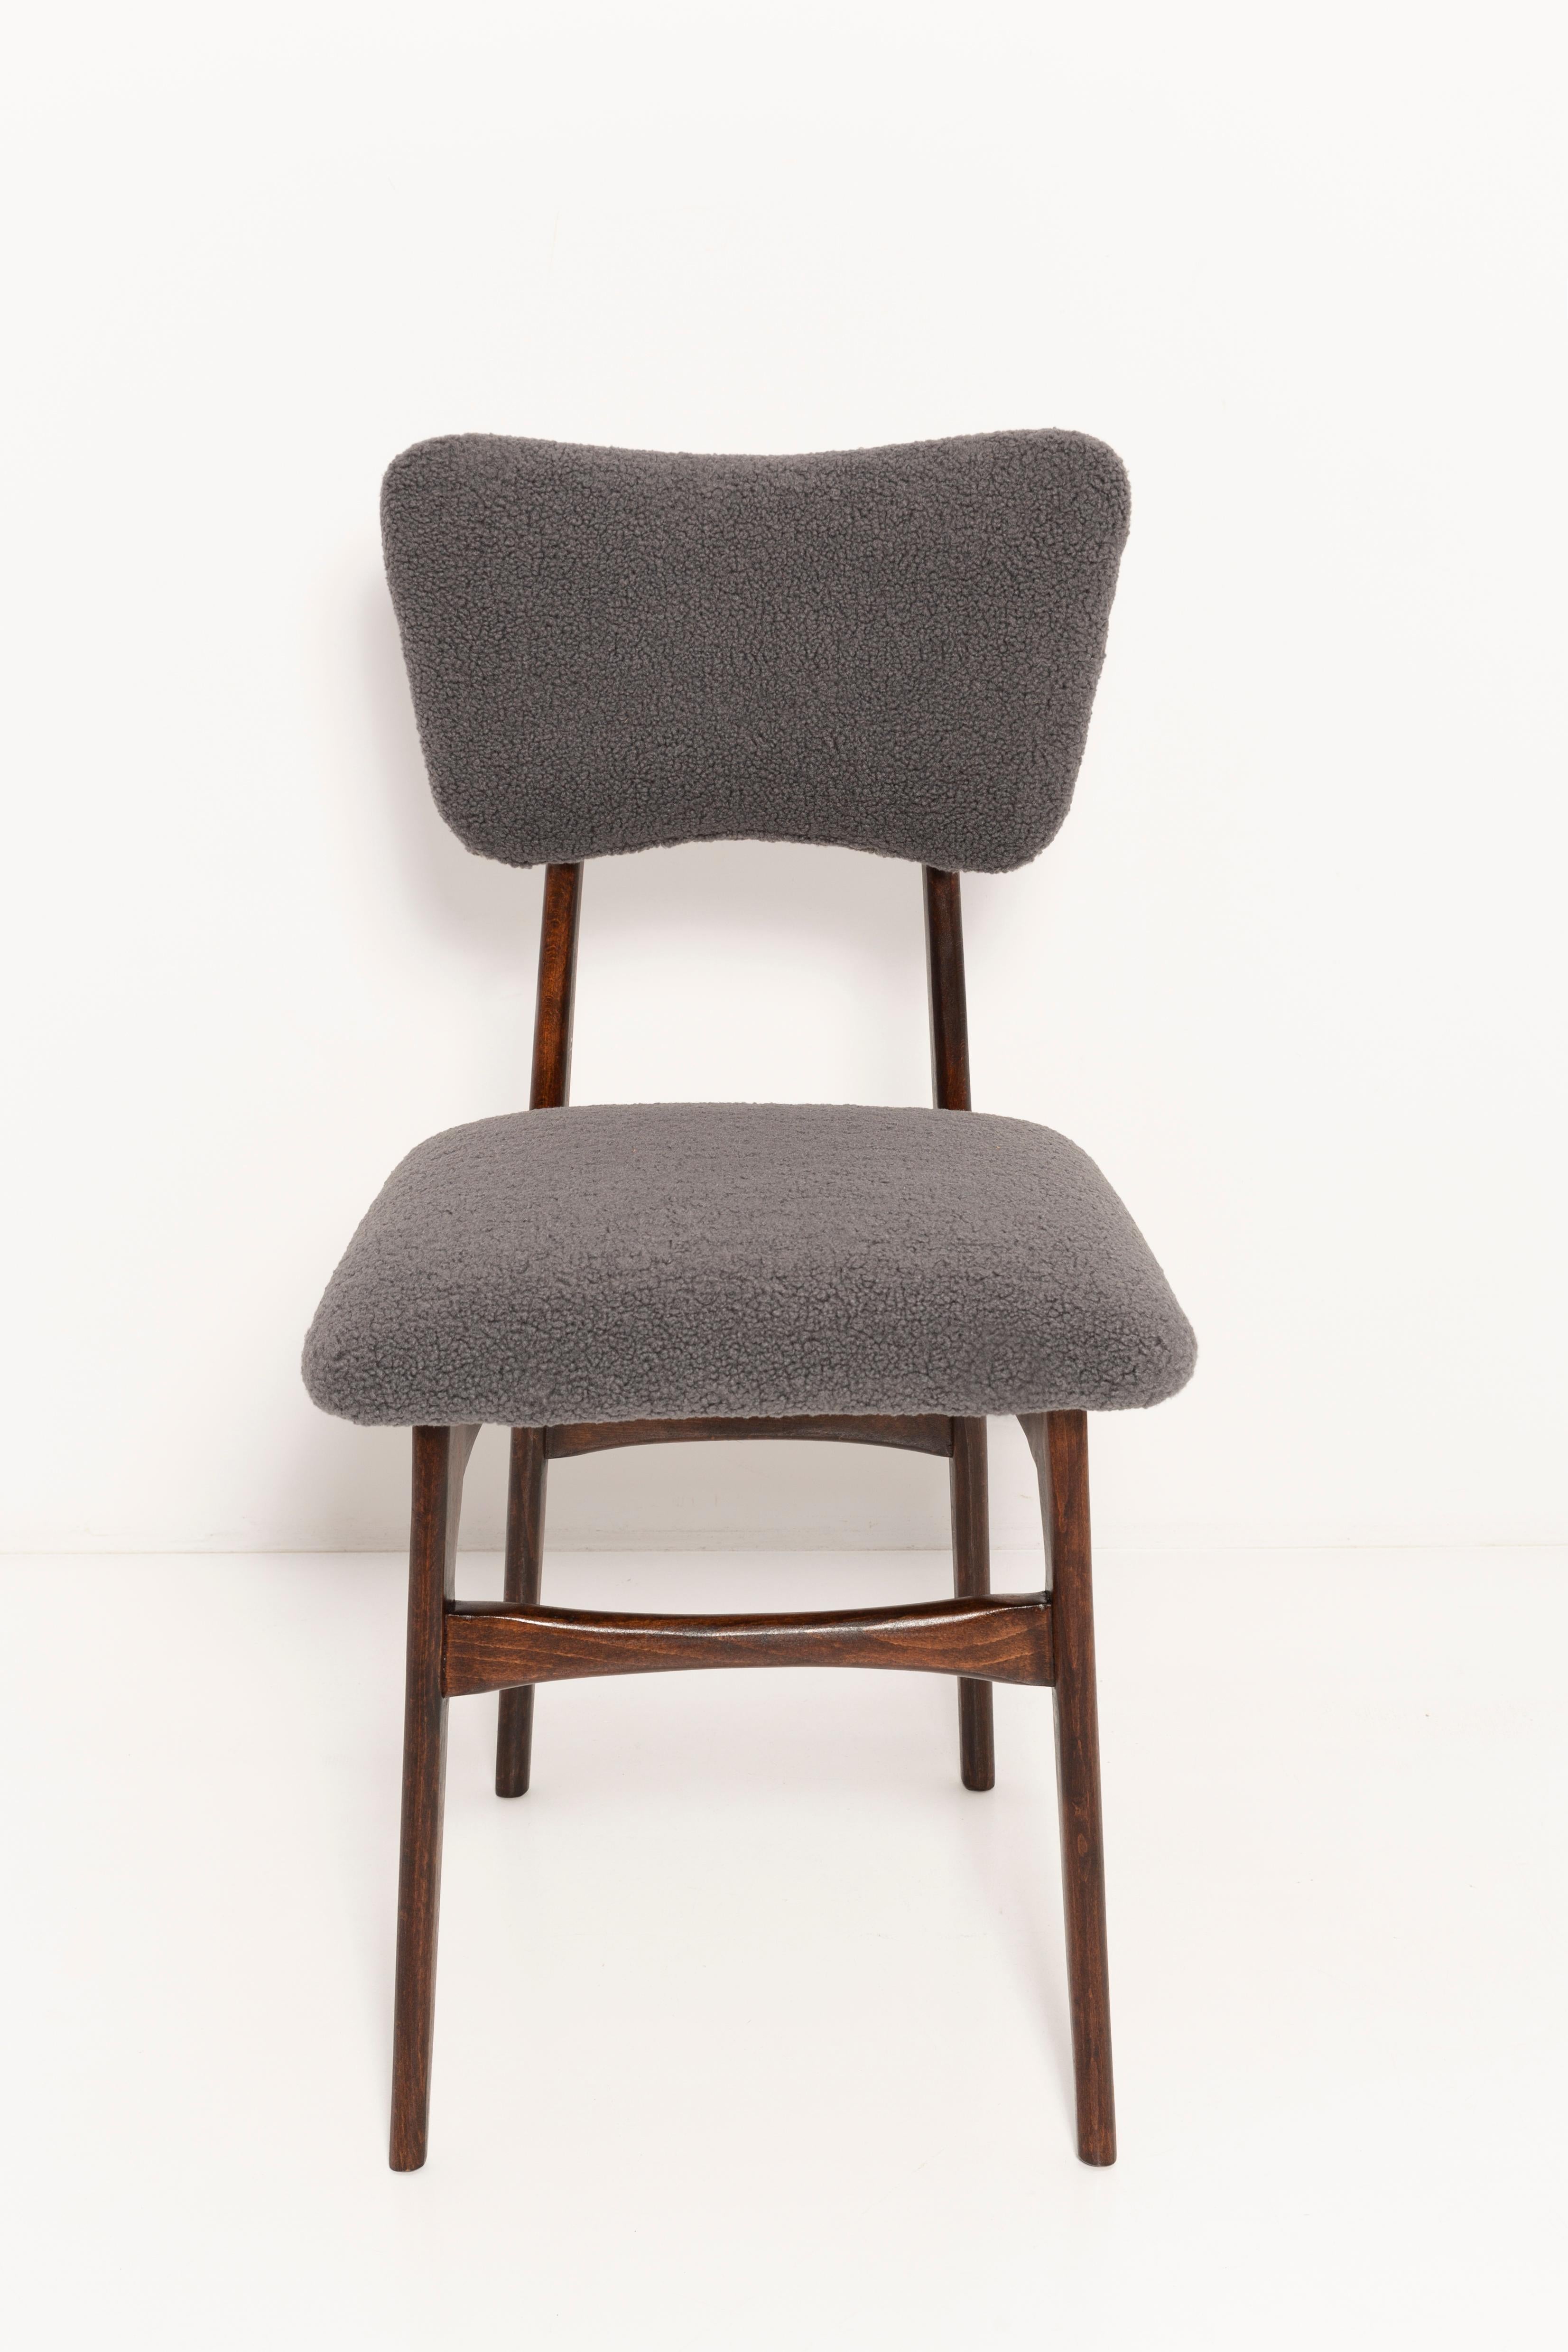 Set of Six Dark Gray Boucle 'Butterfly' Chairs, Europe, 1960s For Sale 2